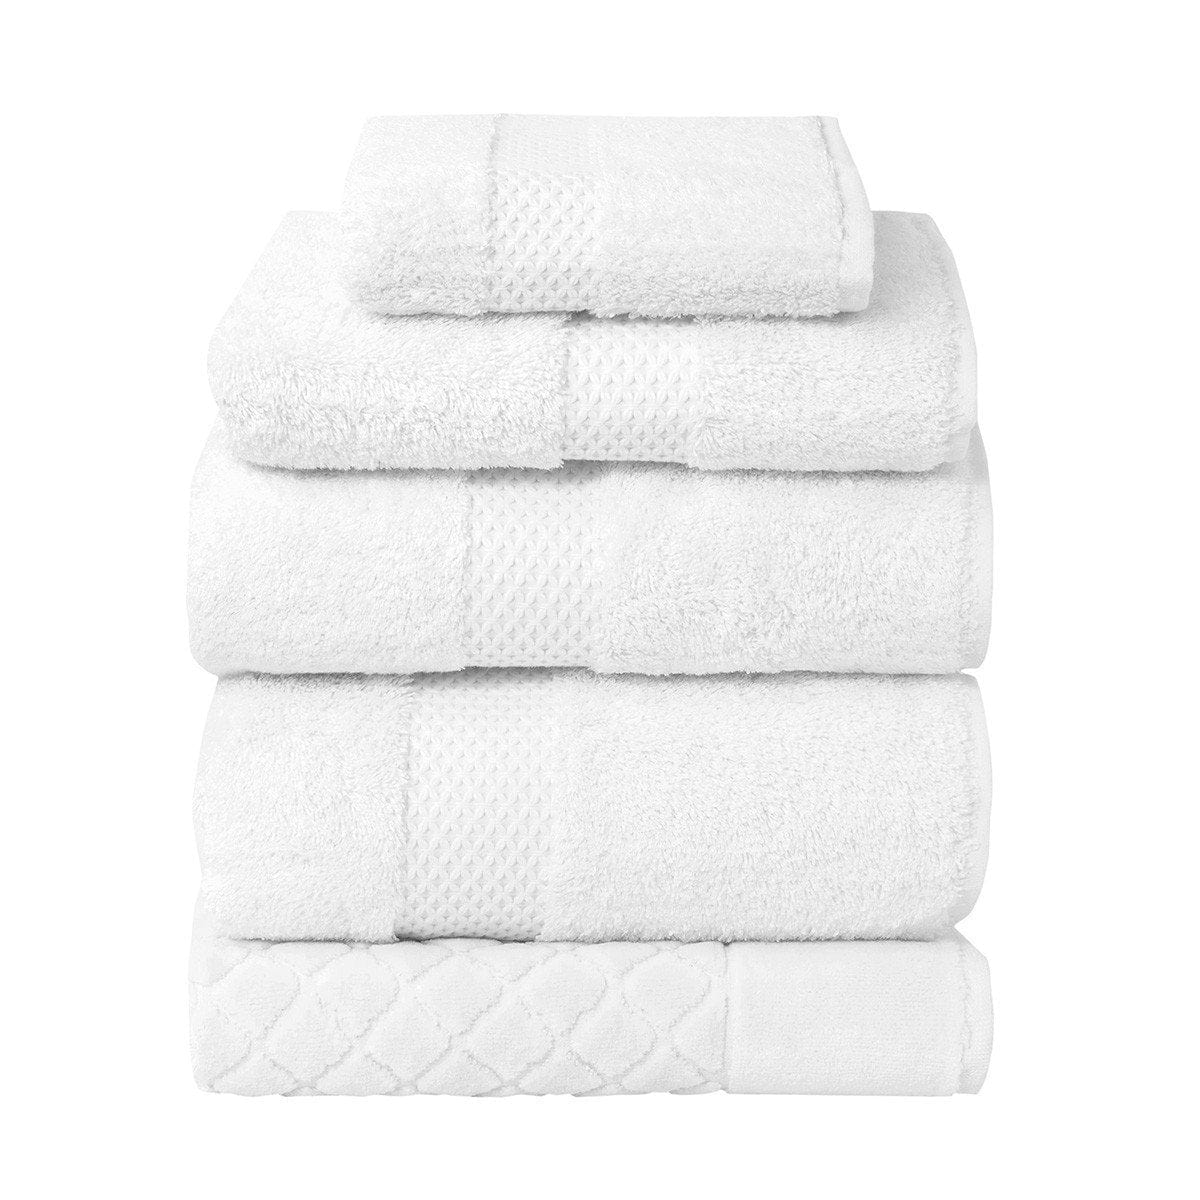 Bath Towels & Washcloths Etoile Towels by Yves Delorme Wash Cloth 13 x 13 in / Blanc Yves Delorme